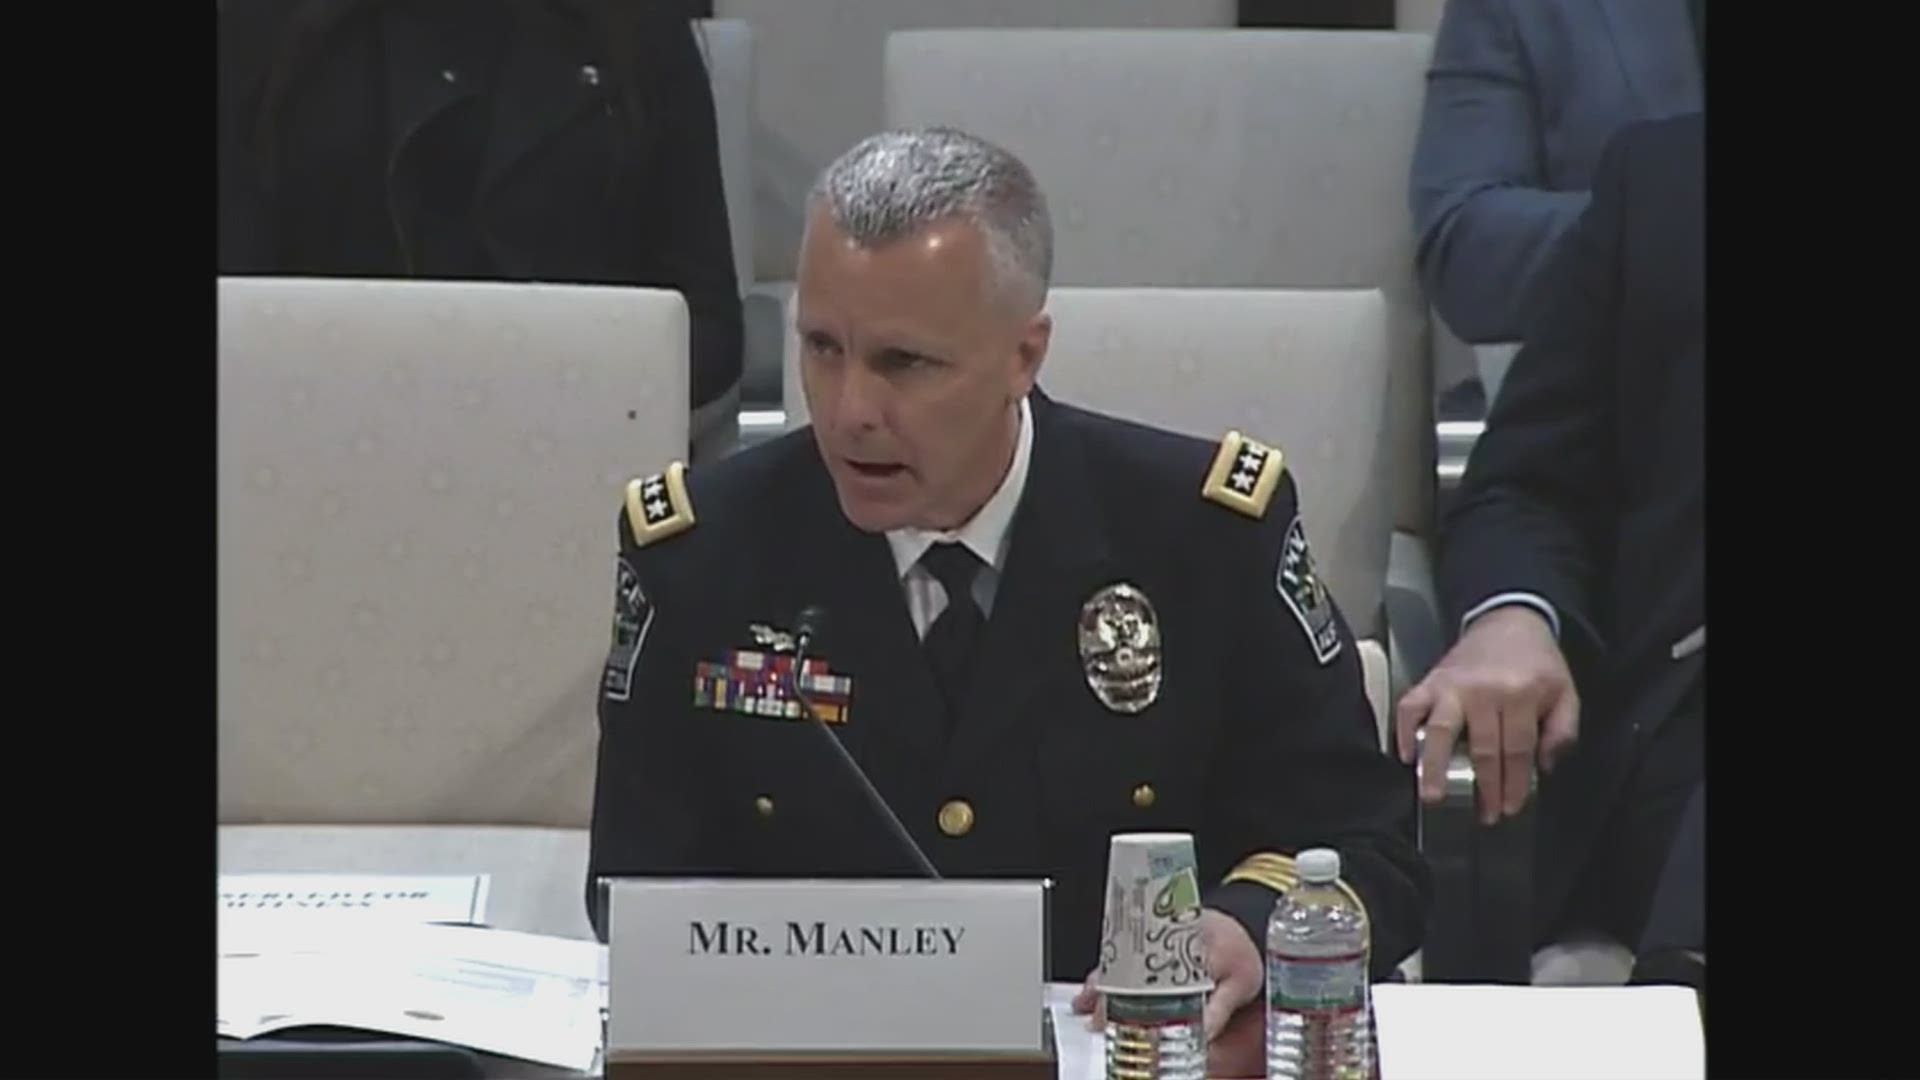 Several weeks after the Austin bomber died, Austin's police chief, Brian Manley, is giving his takeaways regarding the investigation to national officials.